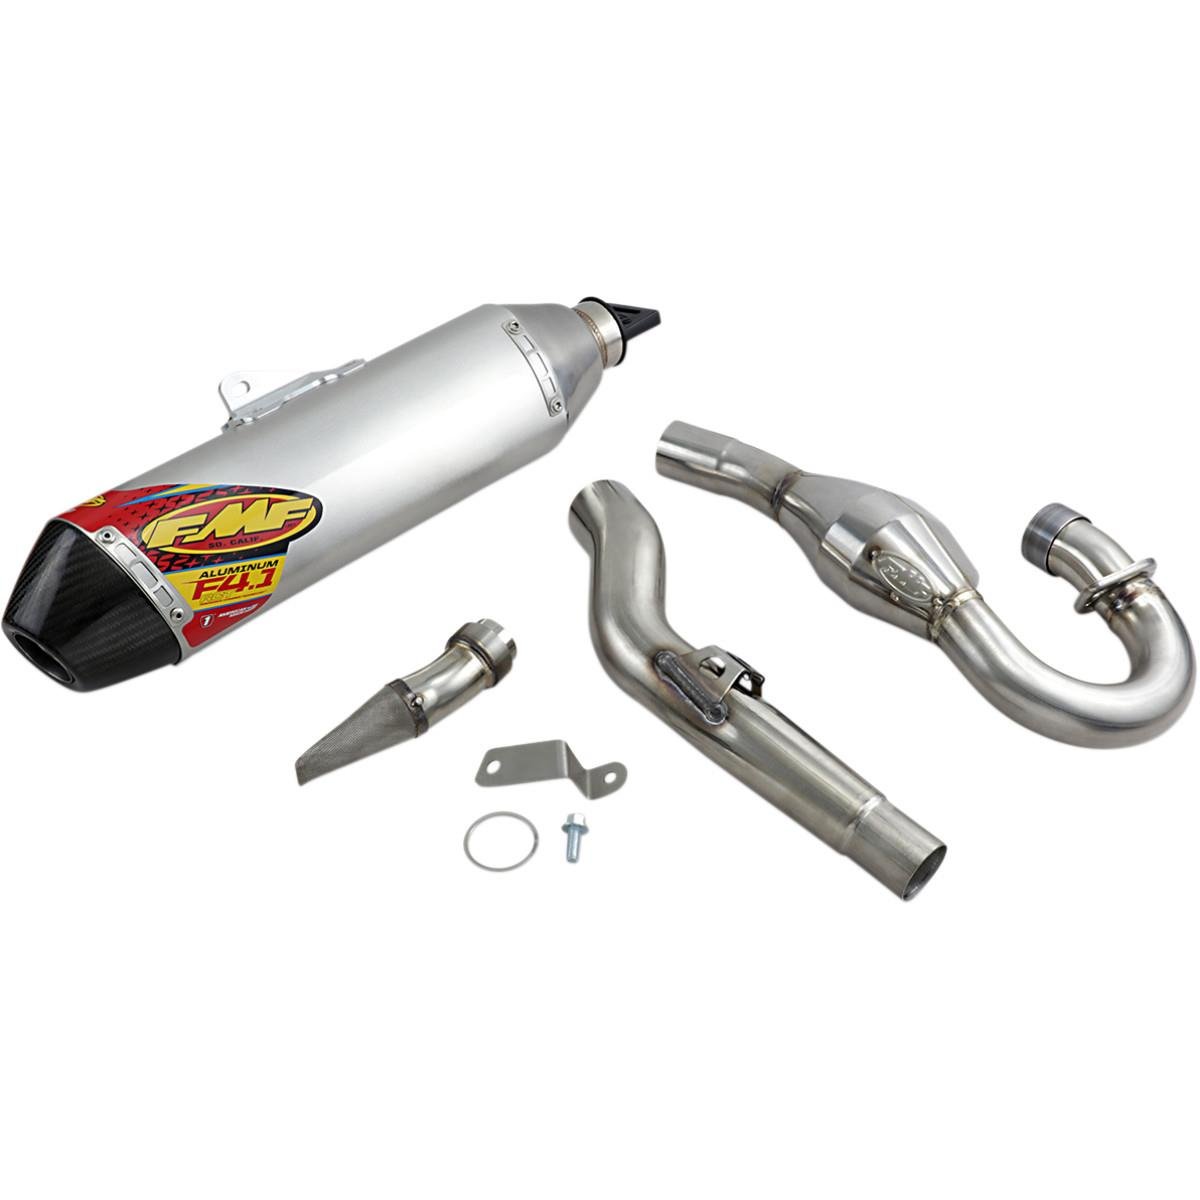 FMF Exhaust System Factory 4.1 RCT Stainless Kawasaki KX 450F 19-